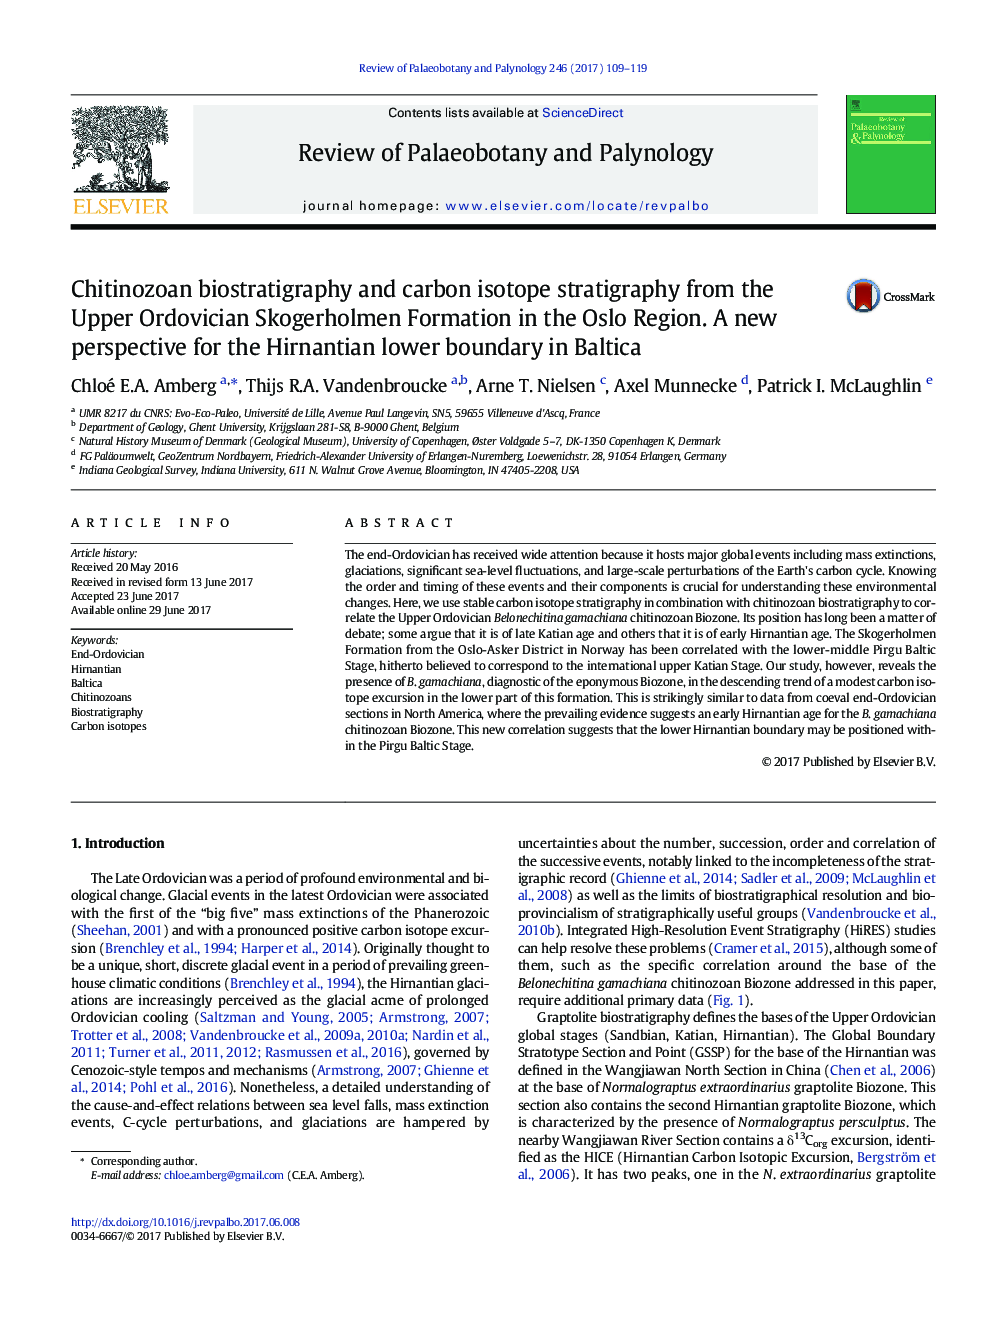 Chitinozoan biostratigraphy and carbon isotope stratigraphy from the Upper Ordovician Skogerholmen Formation in the Oslo Region. A new perspective for the Hirnantian lower boundary in Baltica